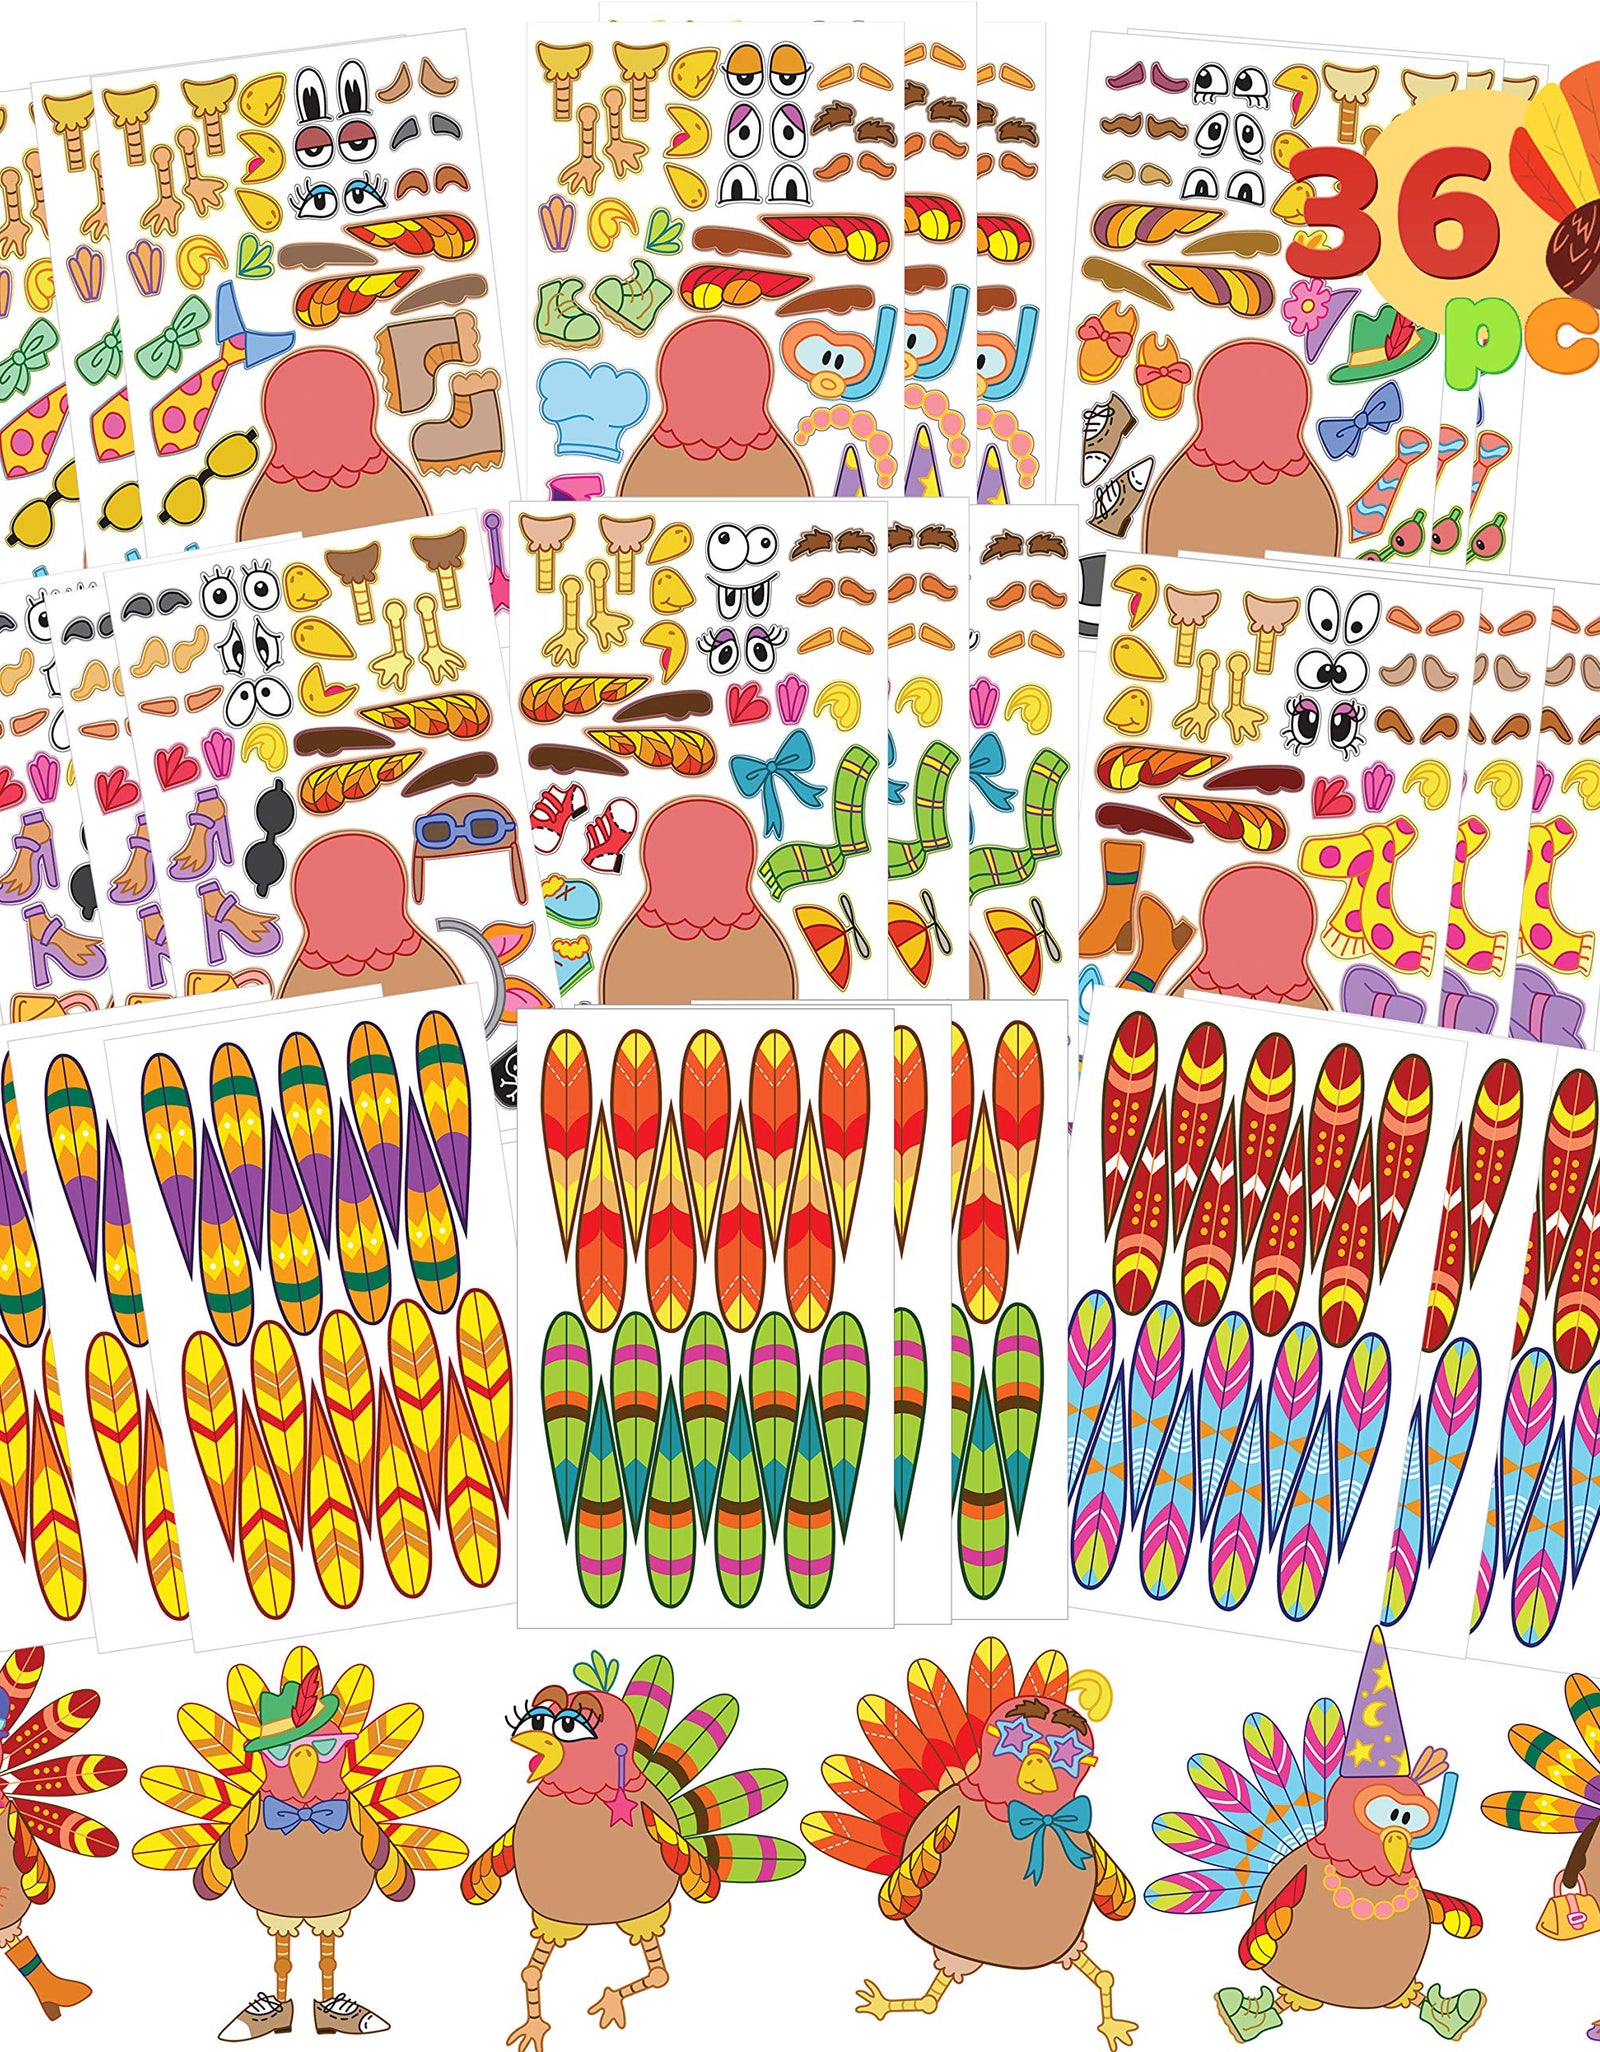 JOYIN 36 PCS Thanksgiving Make-a-Turkey Sticker Crafts for Kids DIY Turkey Stickers with Different Designs Thanksgiving Activities Party Favors